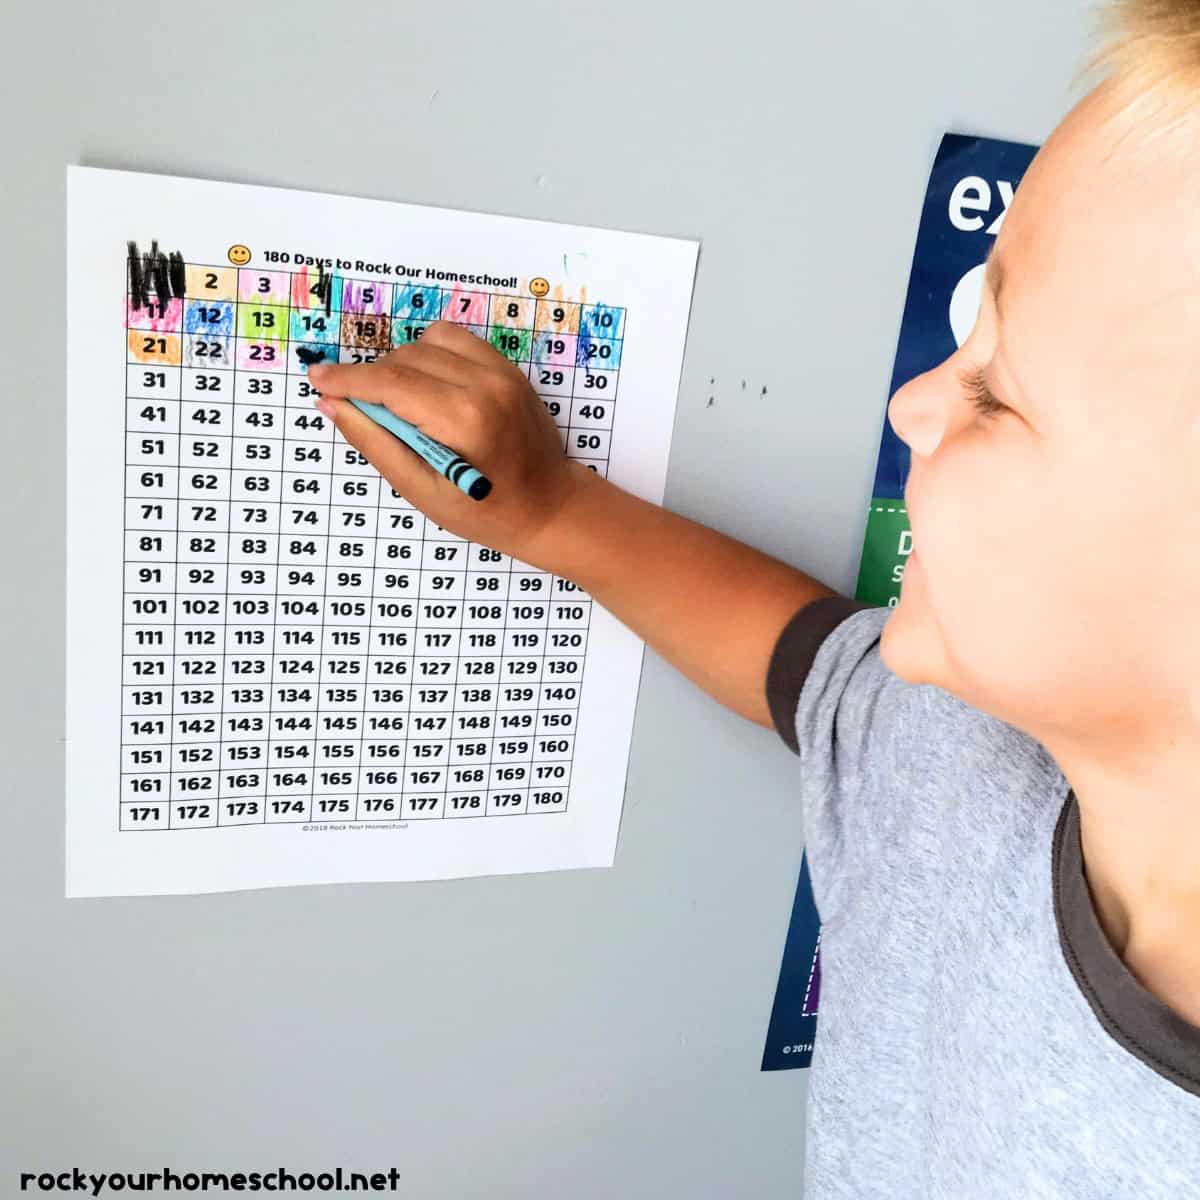 Young boy using crayon to mark off day on track your homeschool year chart for 180 days.